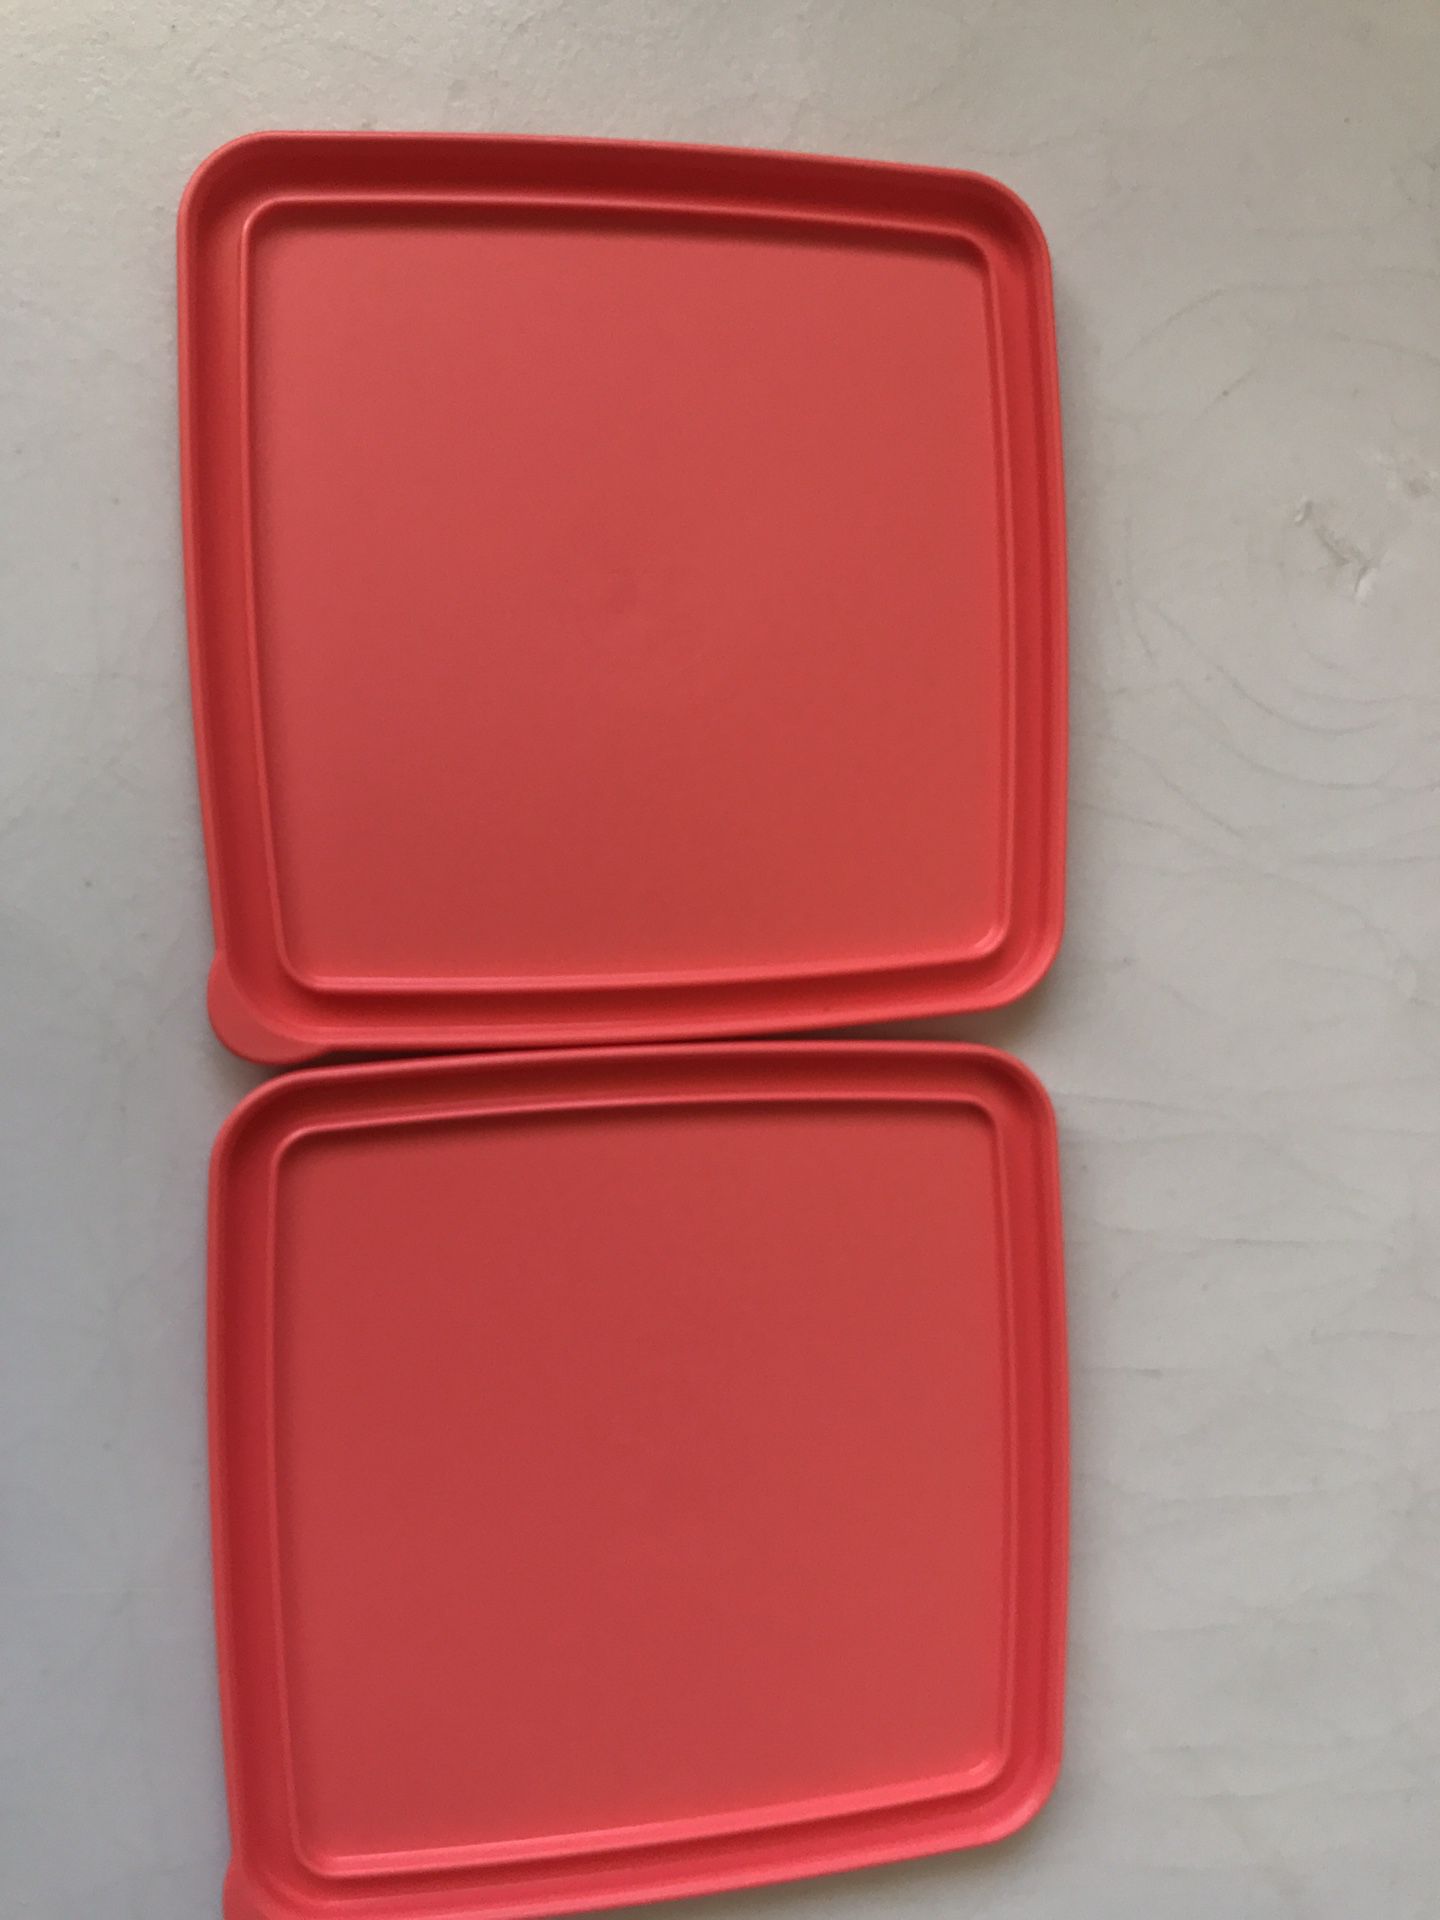 Tupperware FridgeSmart Containers • Set Of 3 for Sale in Tampa, FL